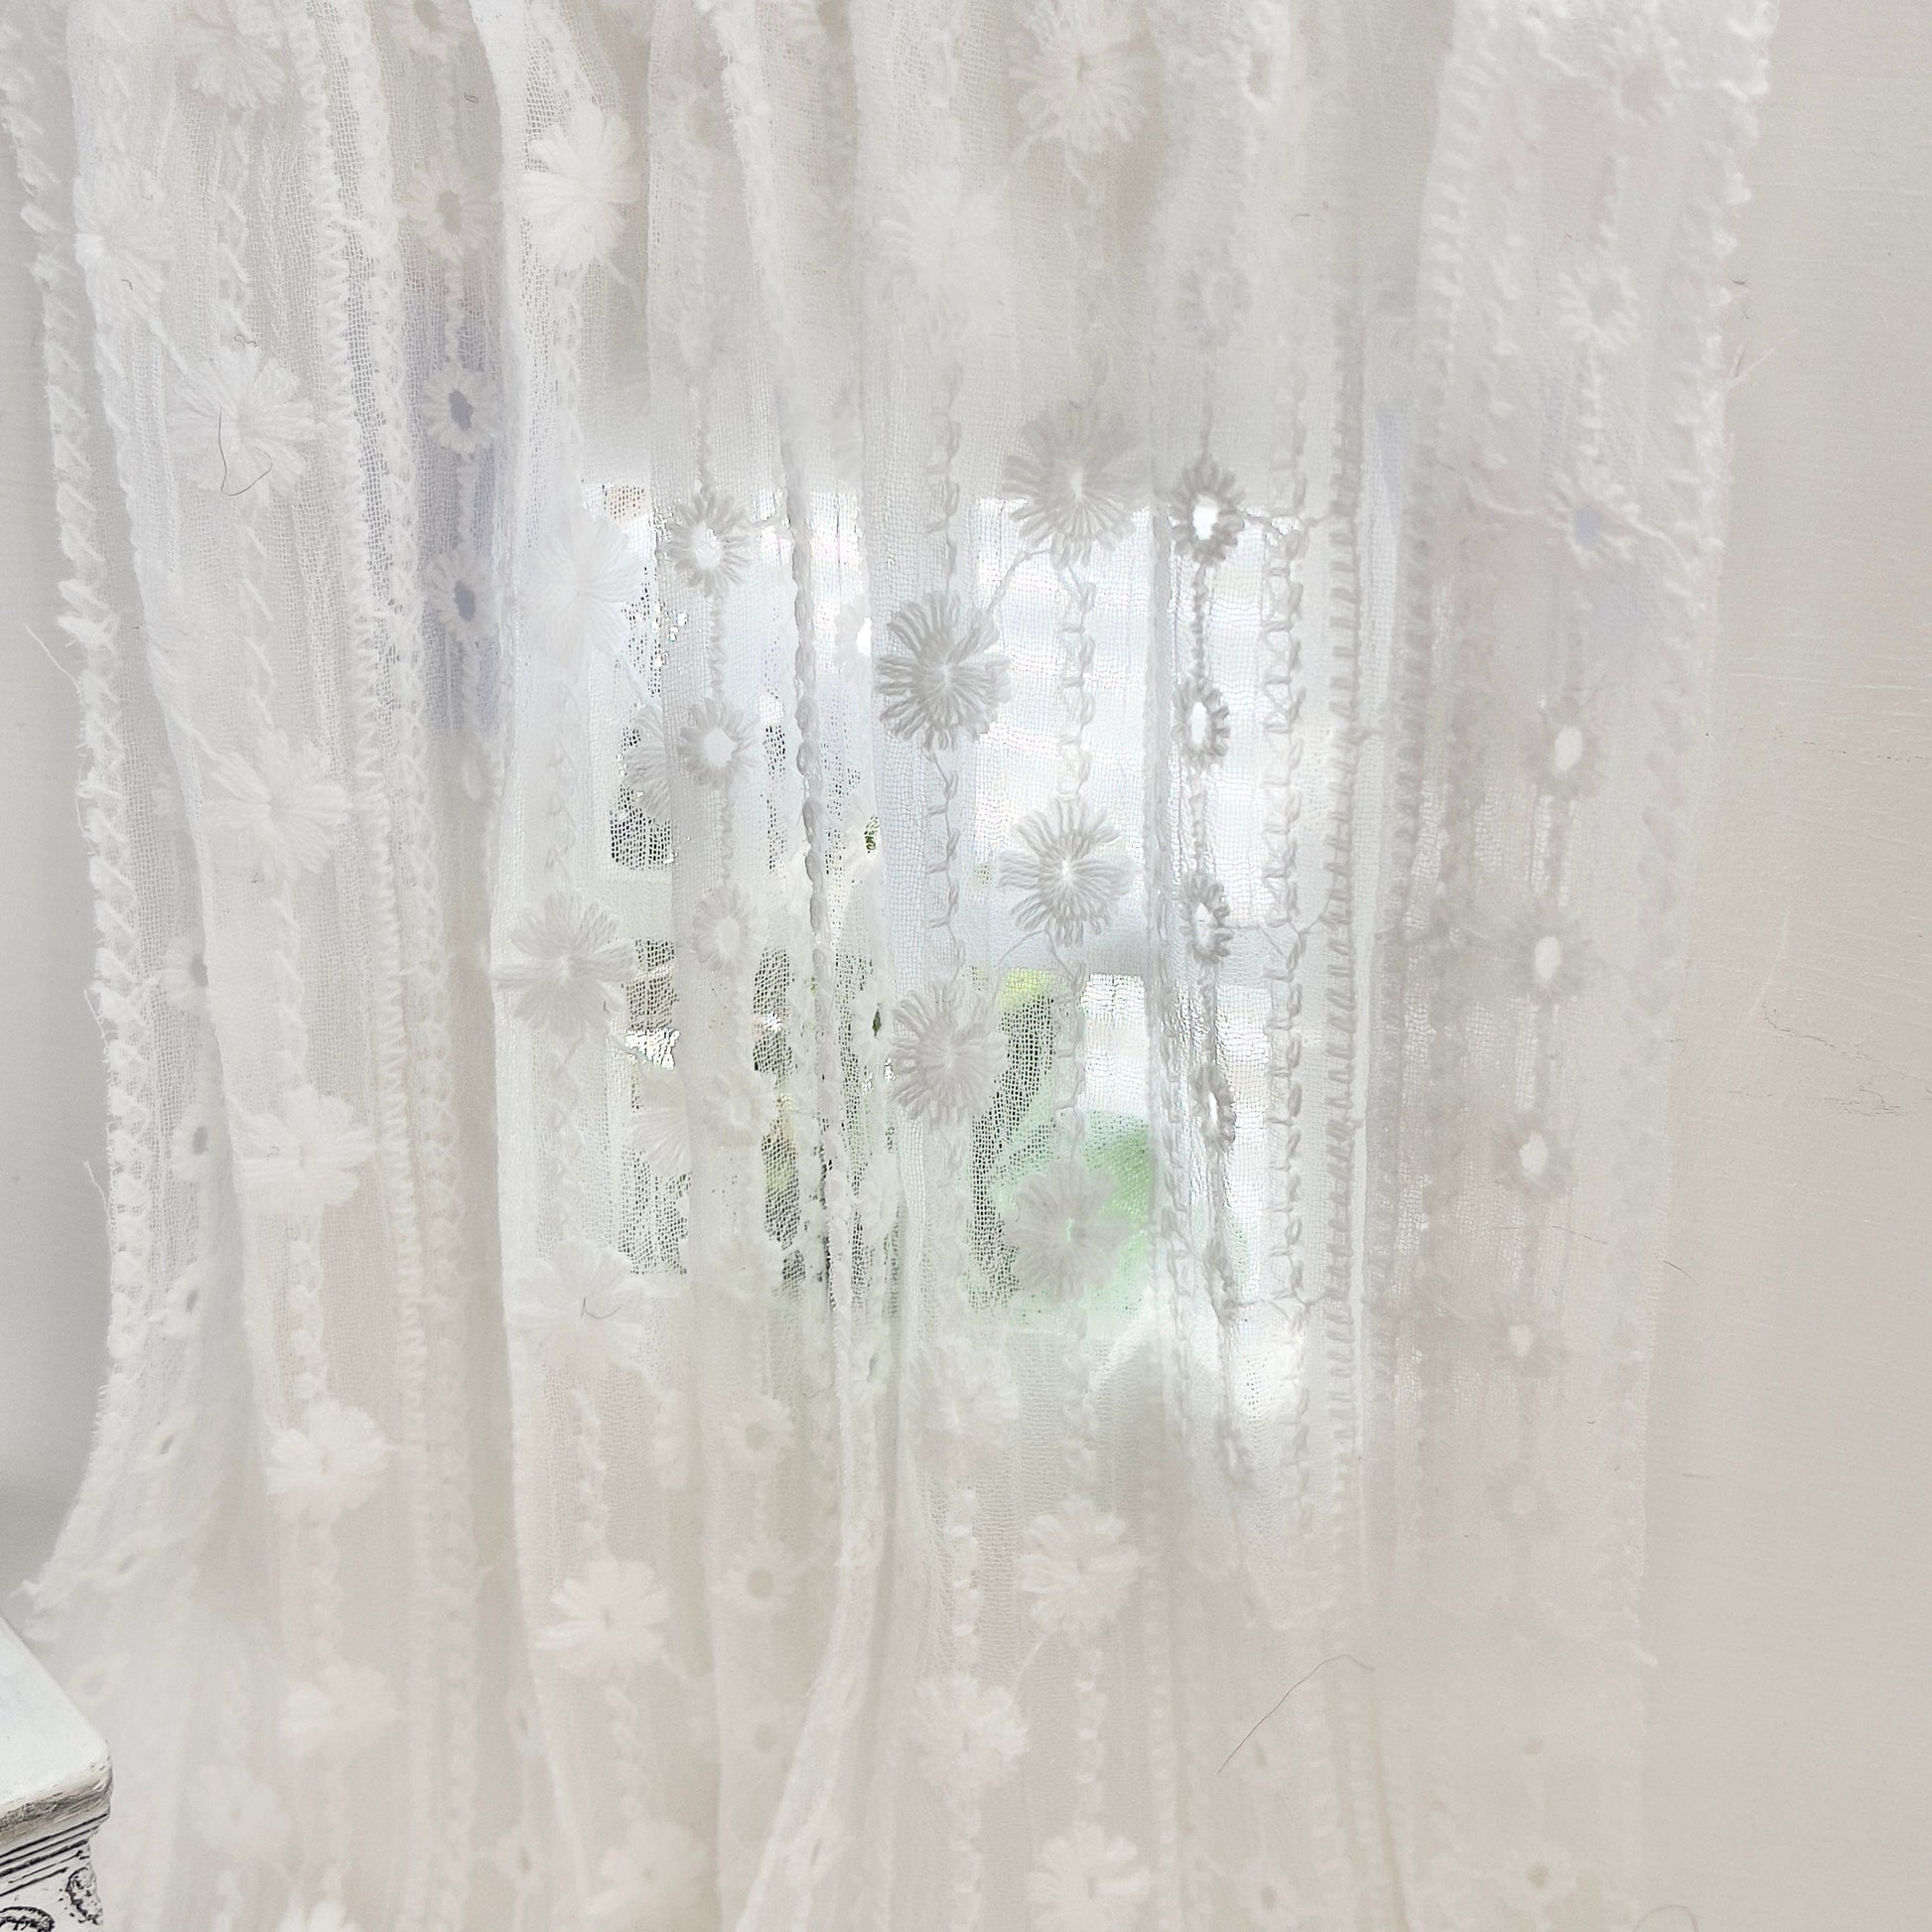 Chantallena Doll House Dollhouse Accessories CURTAINS- White Lace Embroidered 2 Panel Cotton Curtains | White Embroidered Lace | Soft Furnishings